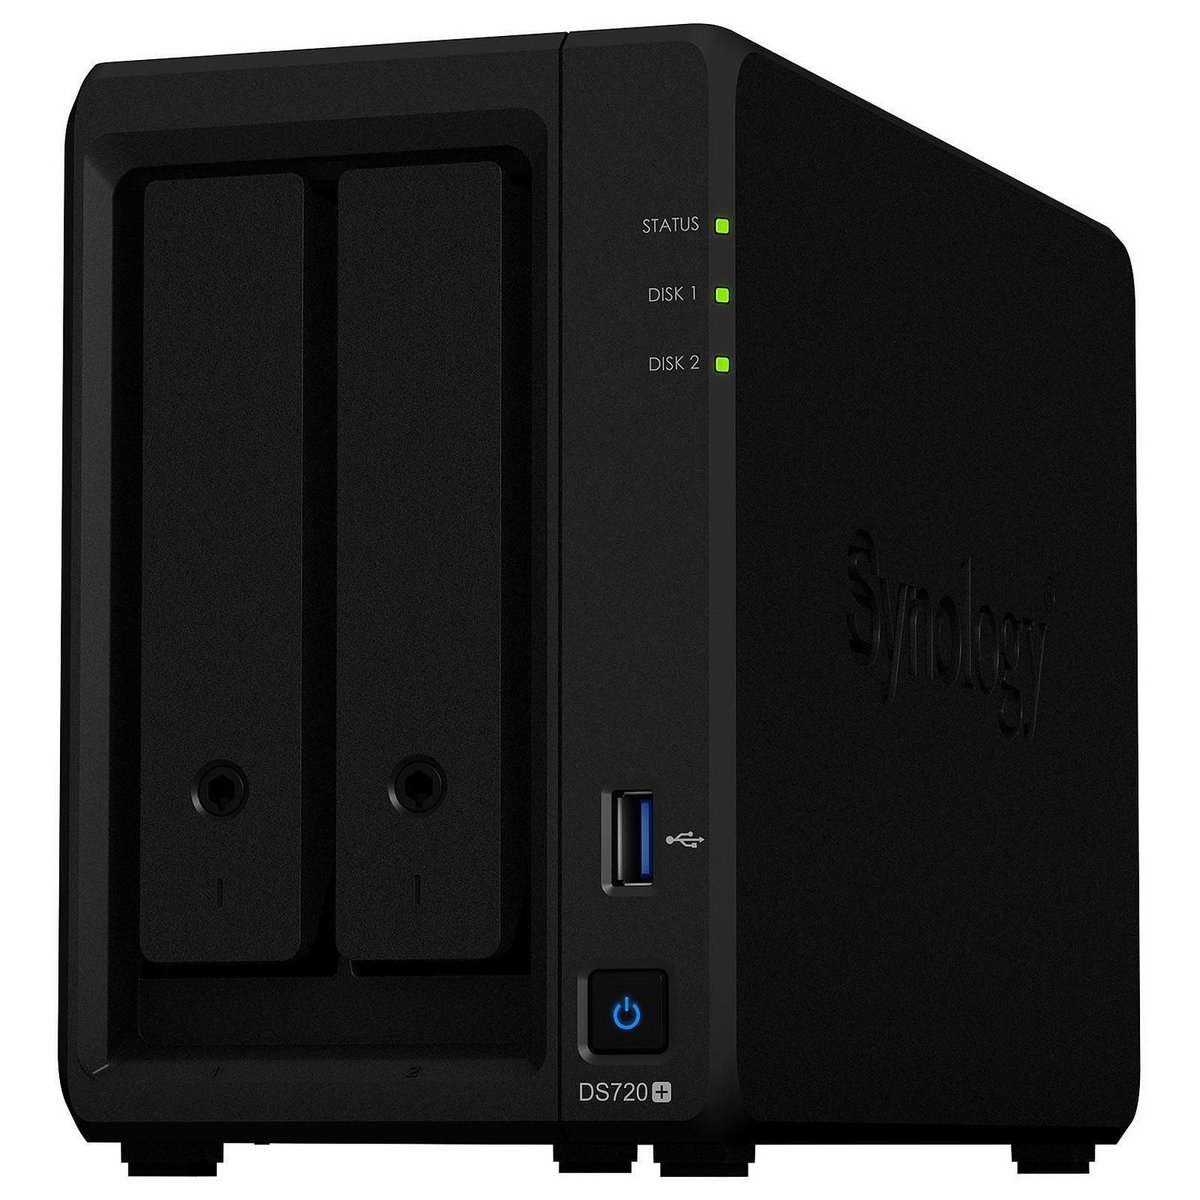 Synology DS720+ © Synology